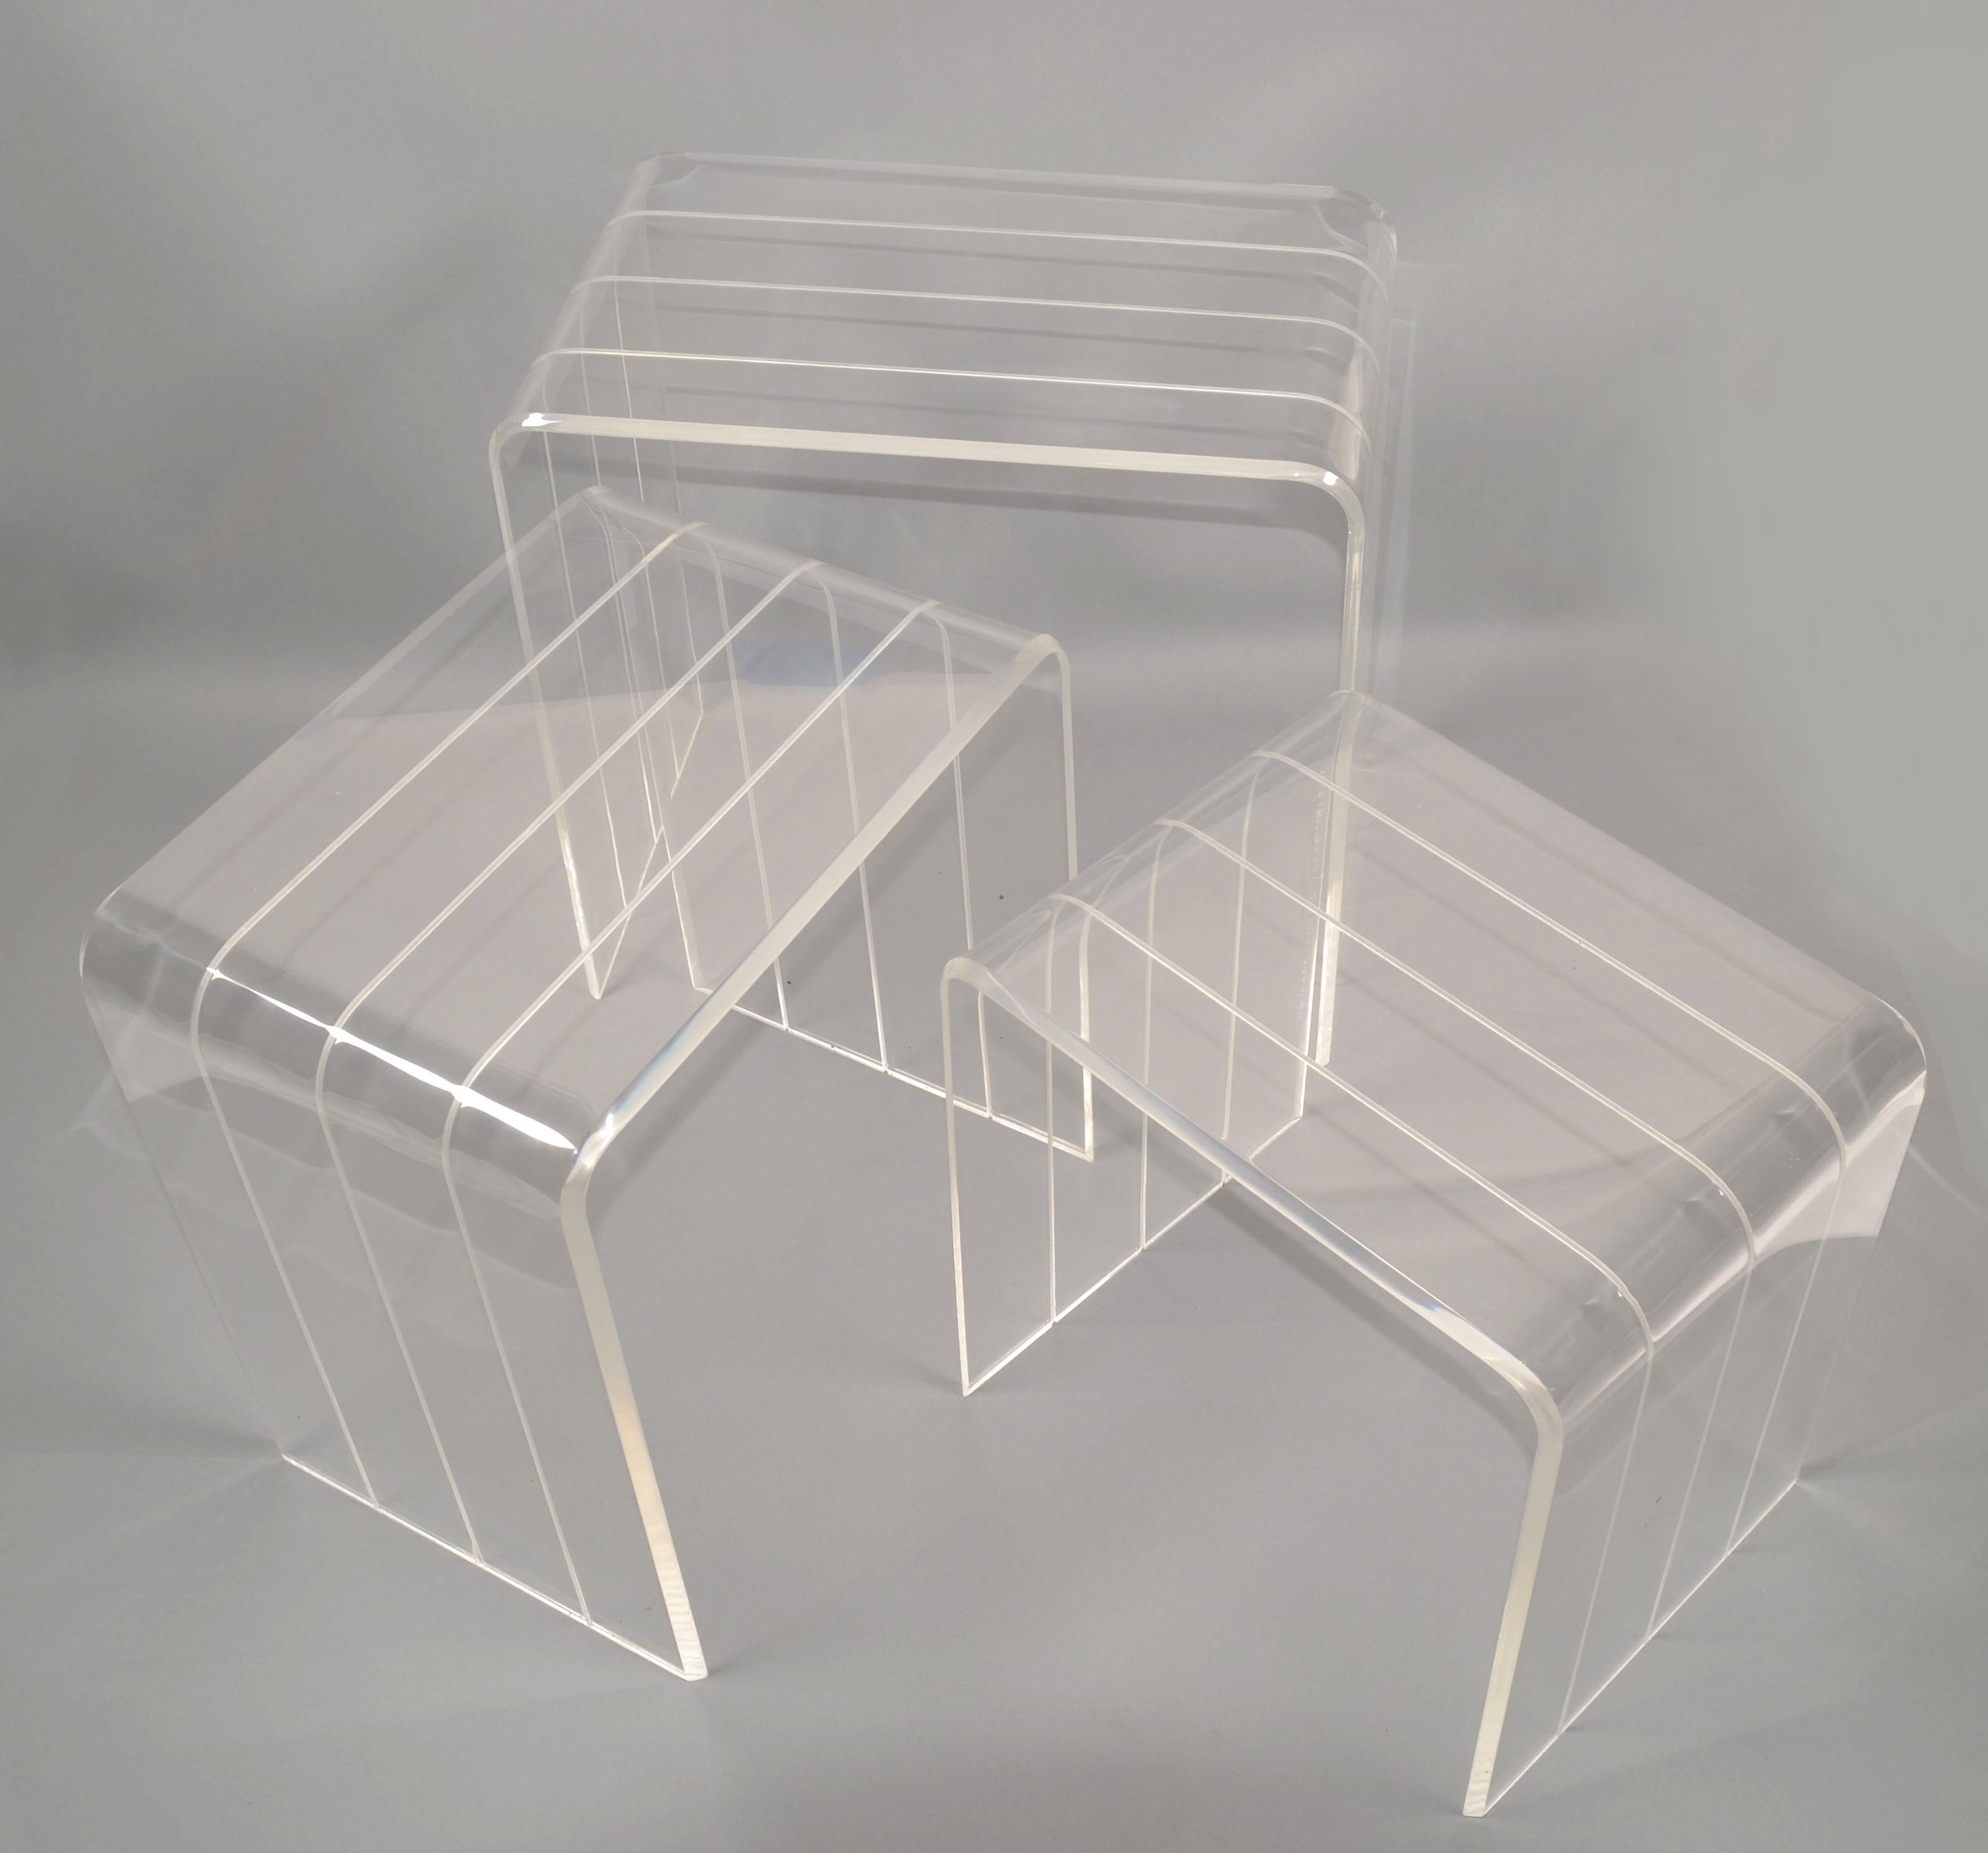 Hand-Crafted Set 3 Italian Etched Lucite Waterfall Nesting Tables Stacking Tables Stools 1970 For Sale